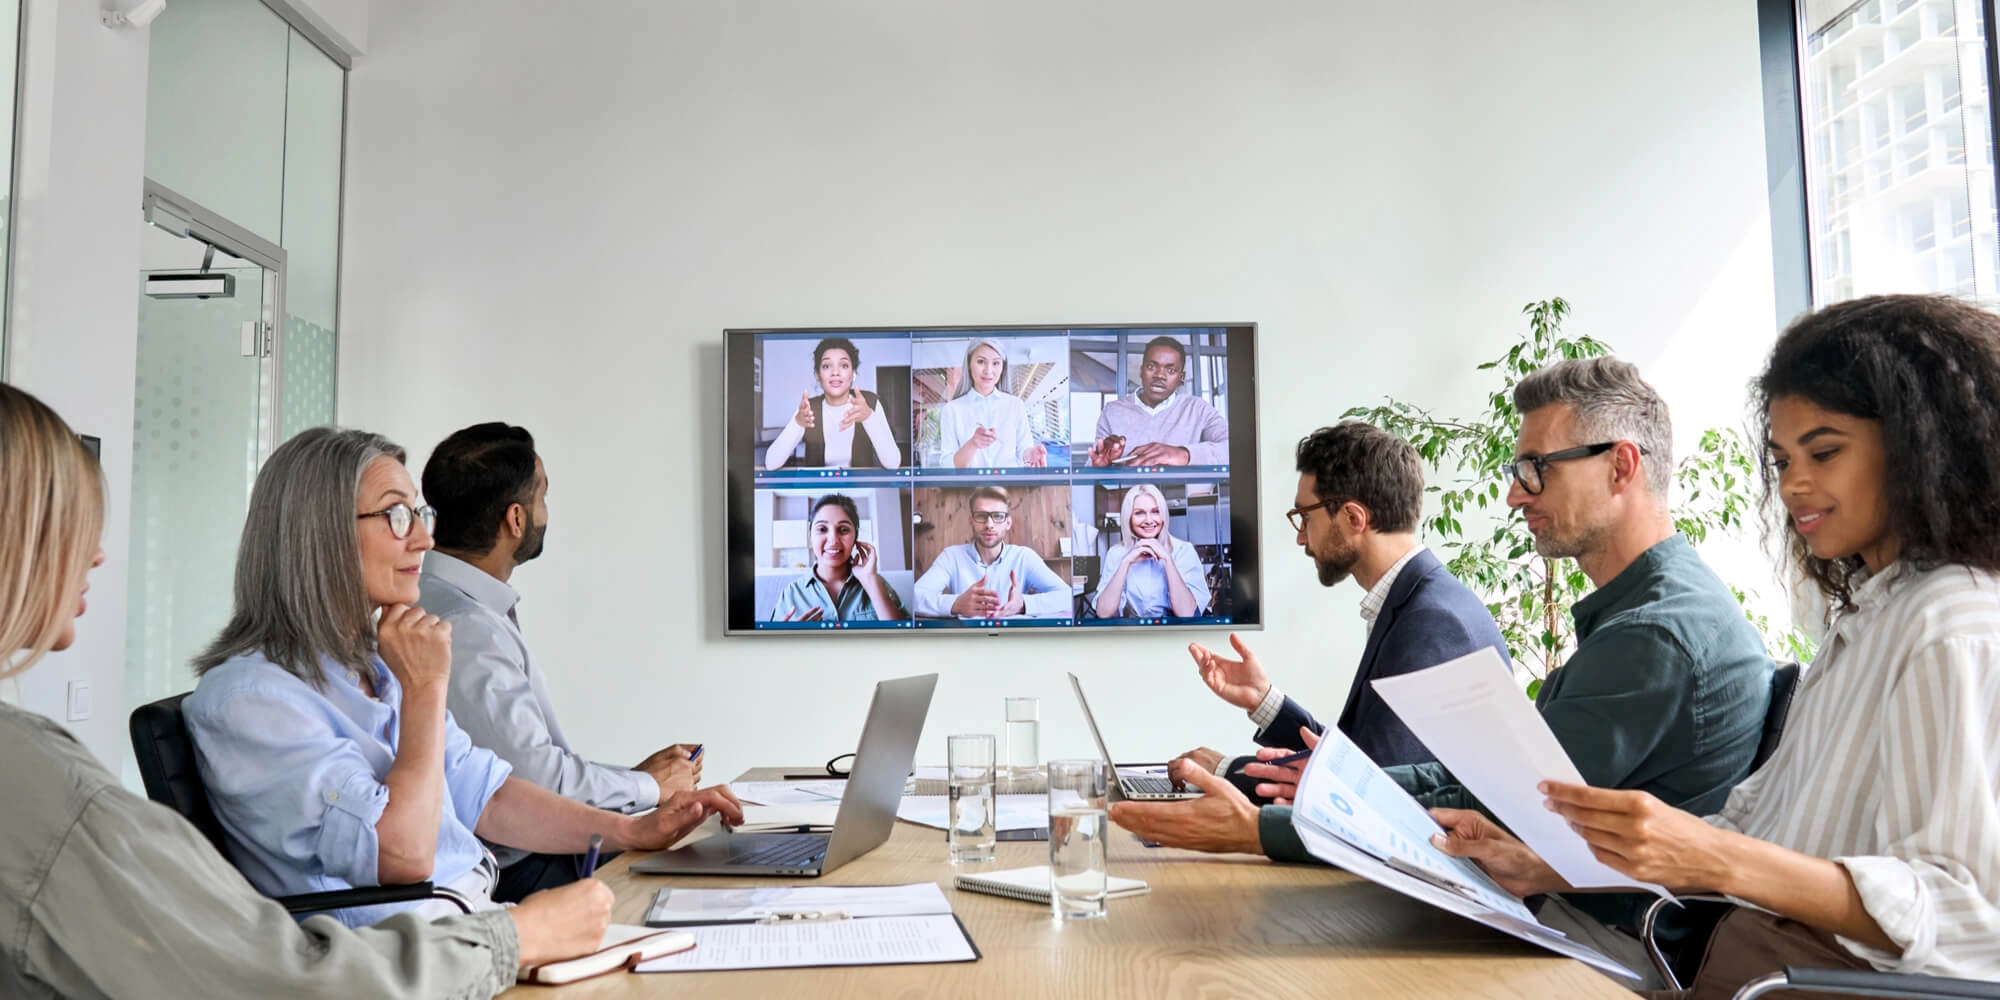 12 essential ground rules for online or hybrid meetings